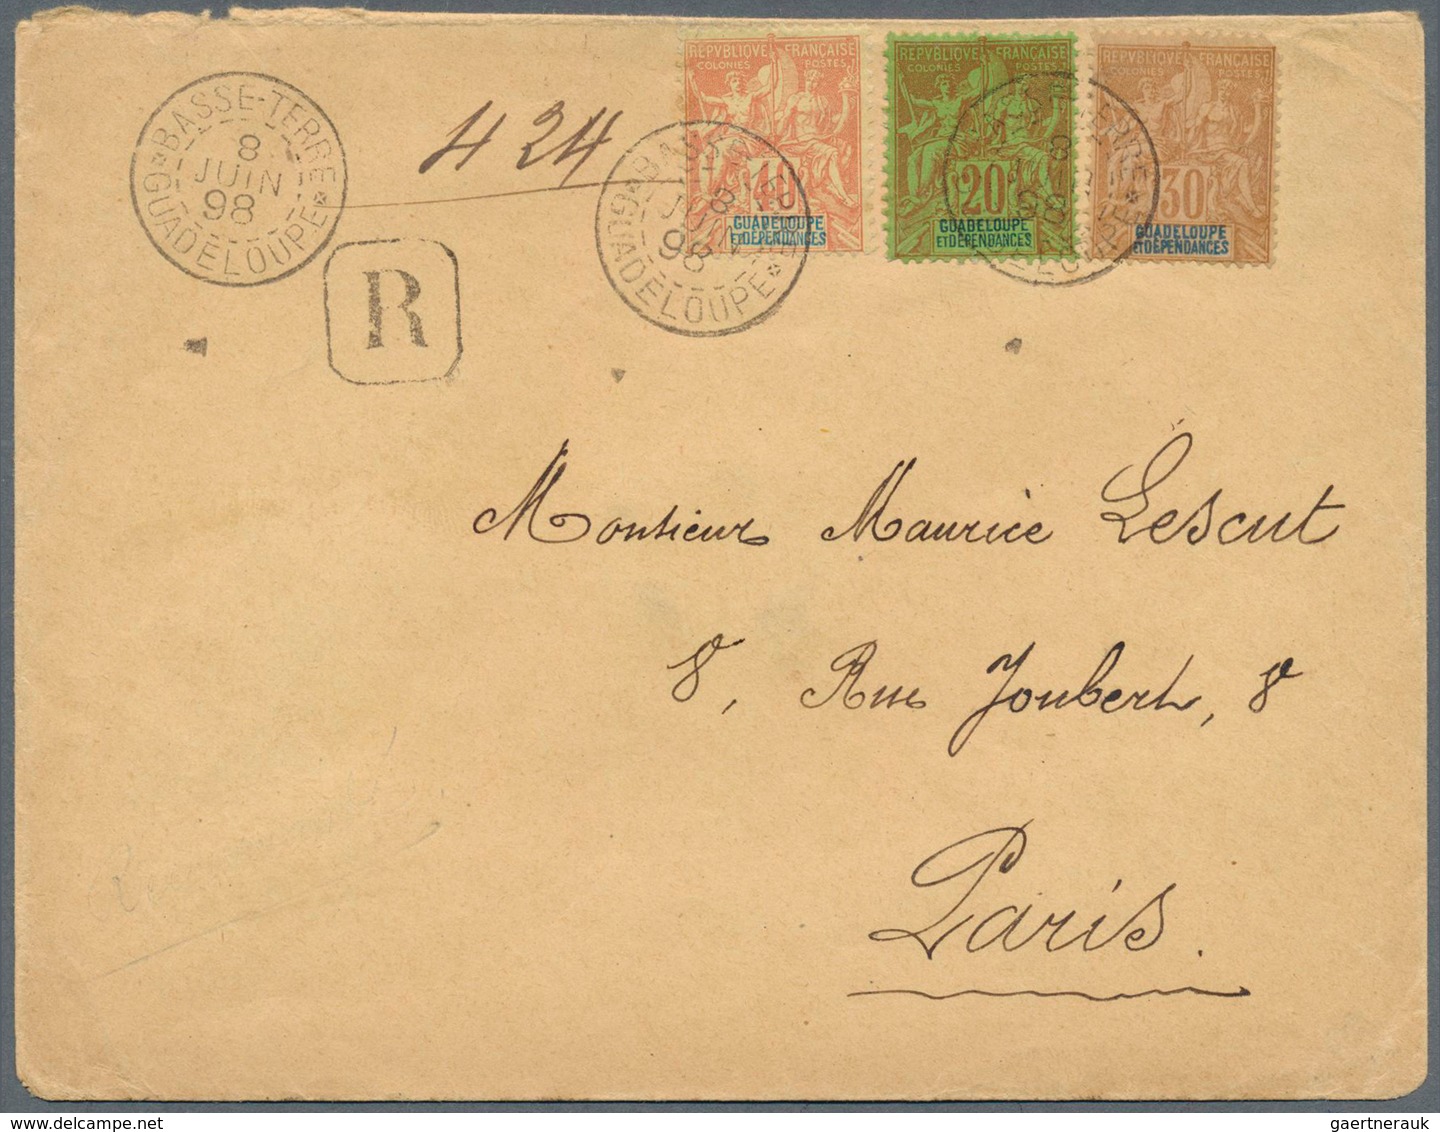 Guadeloupe: 1837/1913, collection of apprx. 90 entires from a nice selection of pre-philatelic/stamp